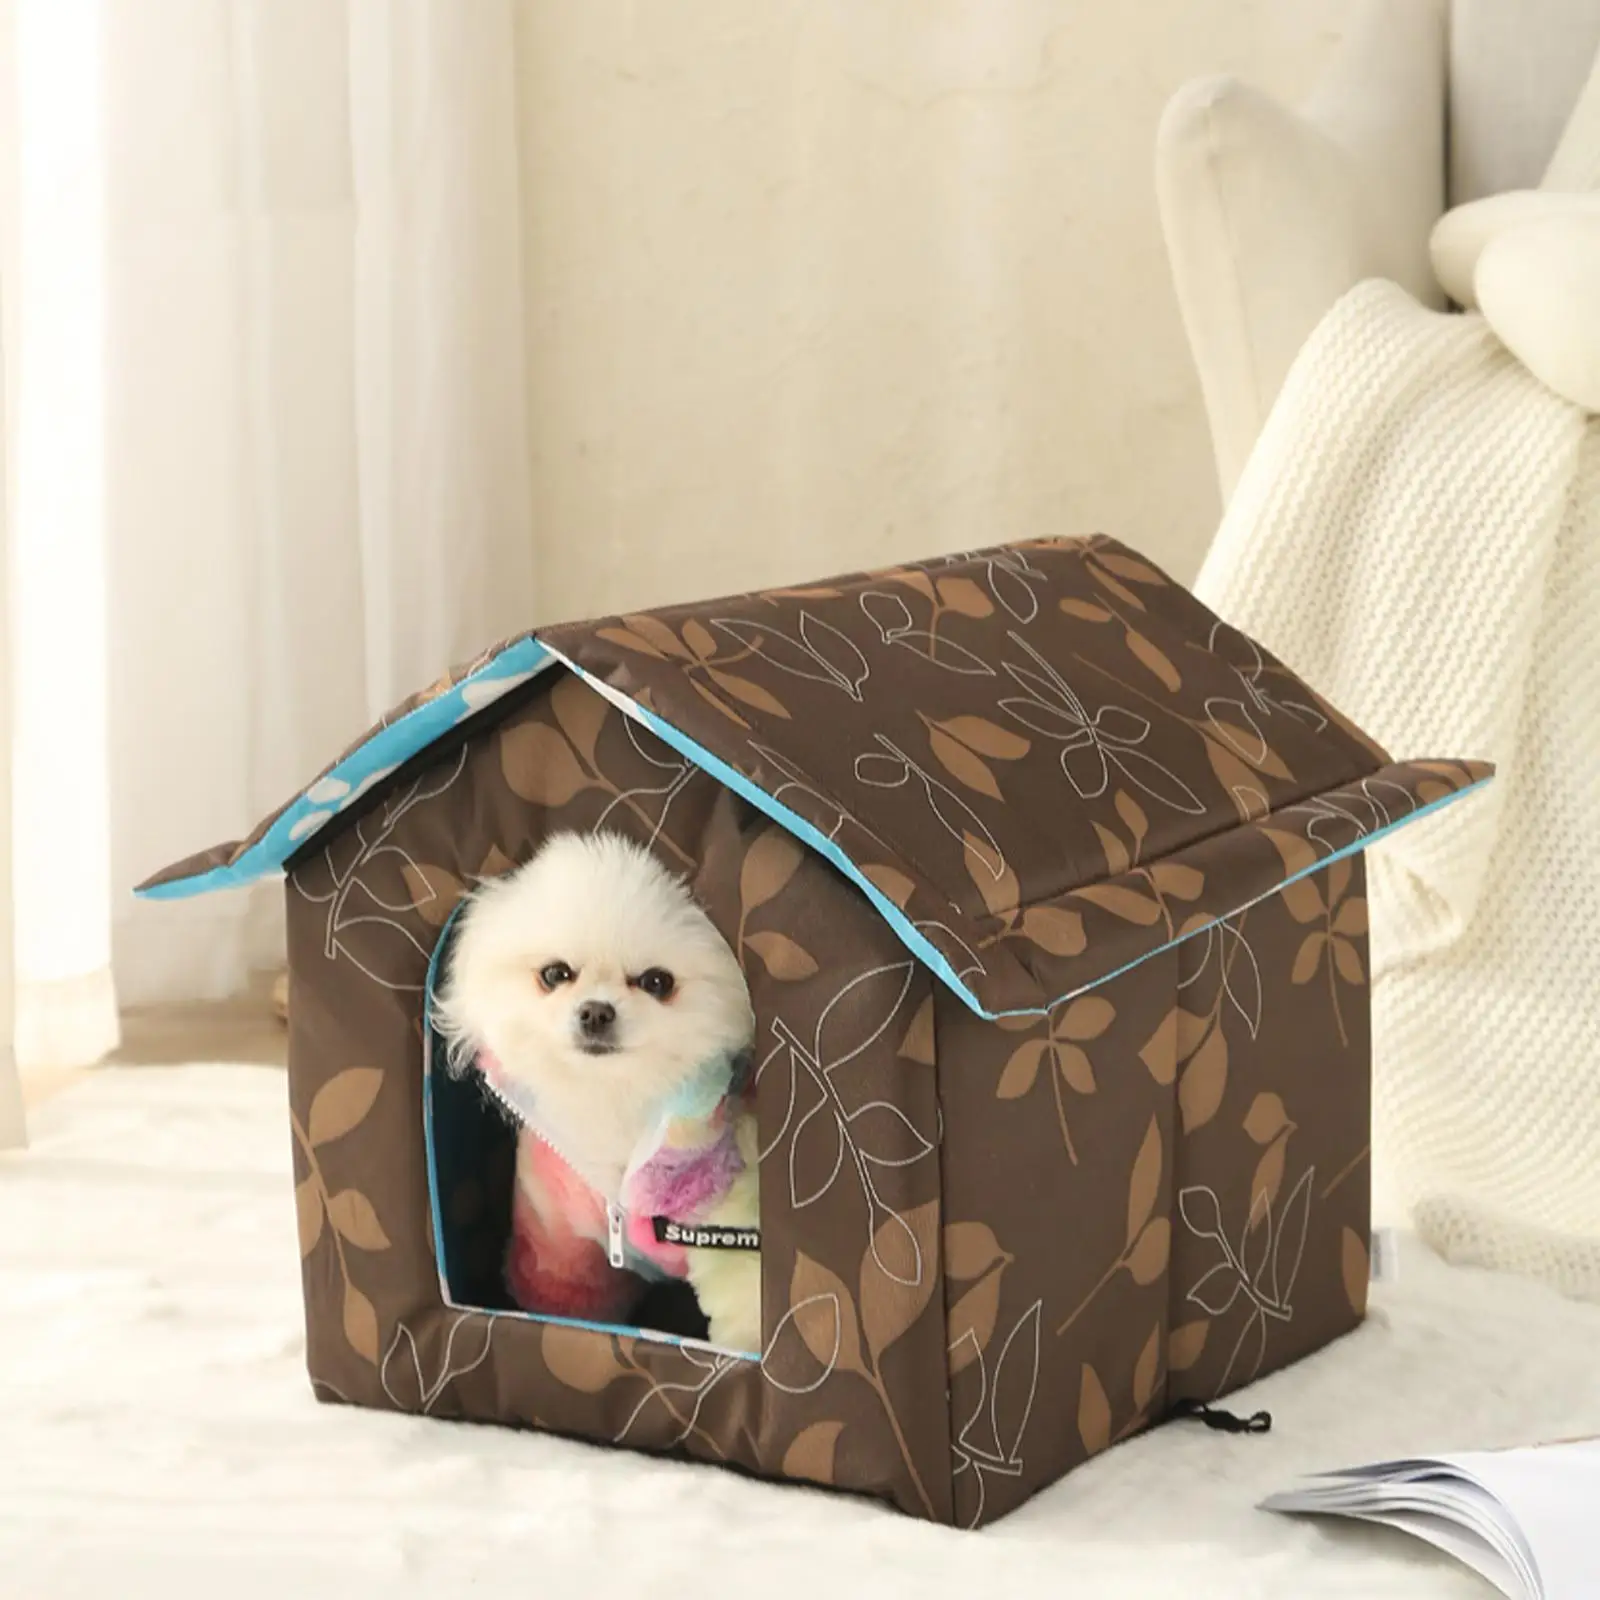 

Waterproof Outdoor S House Keep Warm Pet Cave Beds Nest Funny Foldable And Washable For Kitten Puppy Pets Supplies I1i8